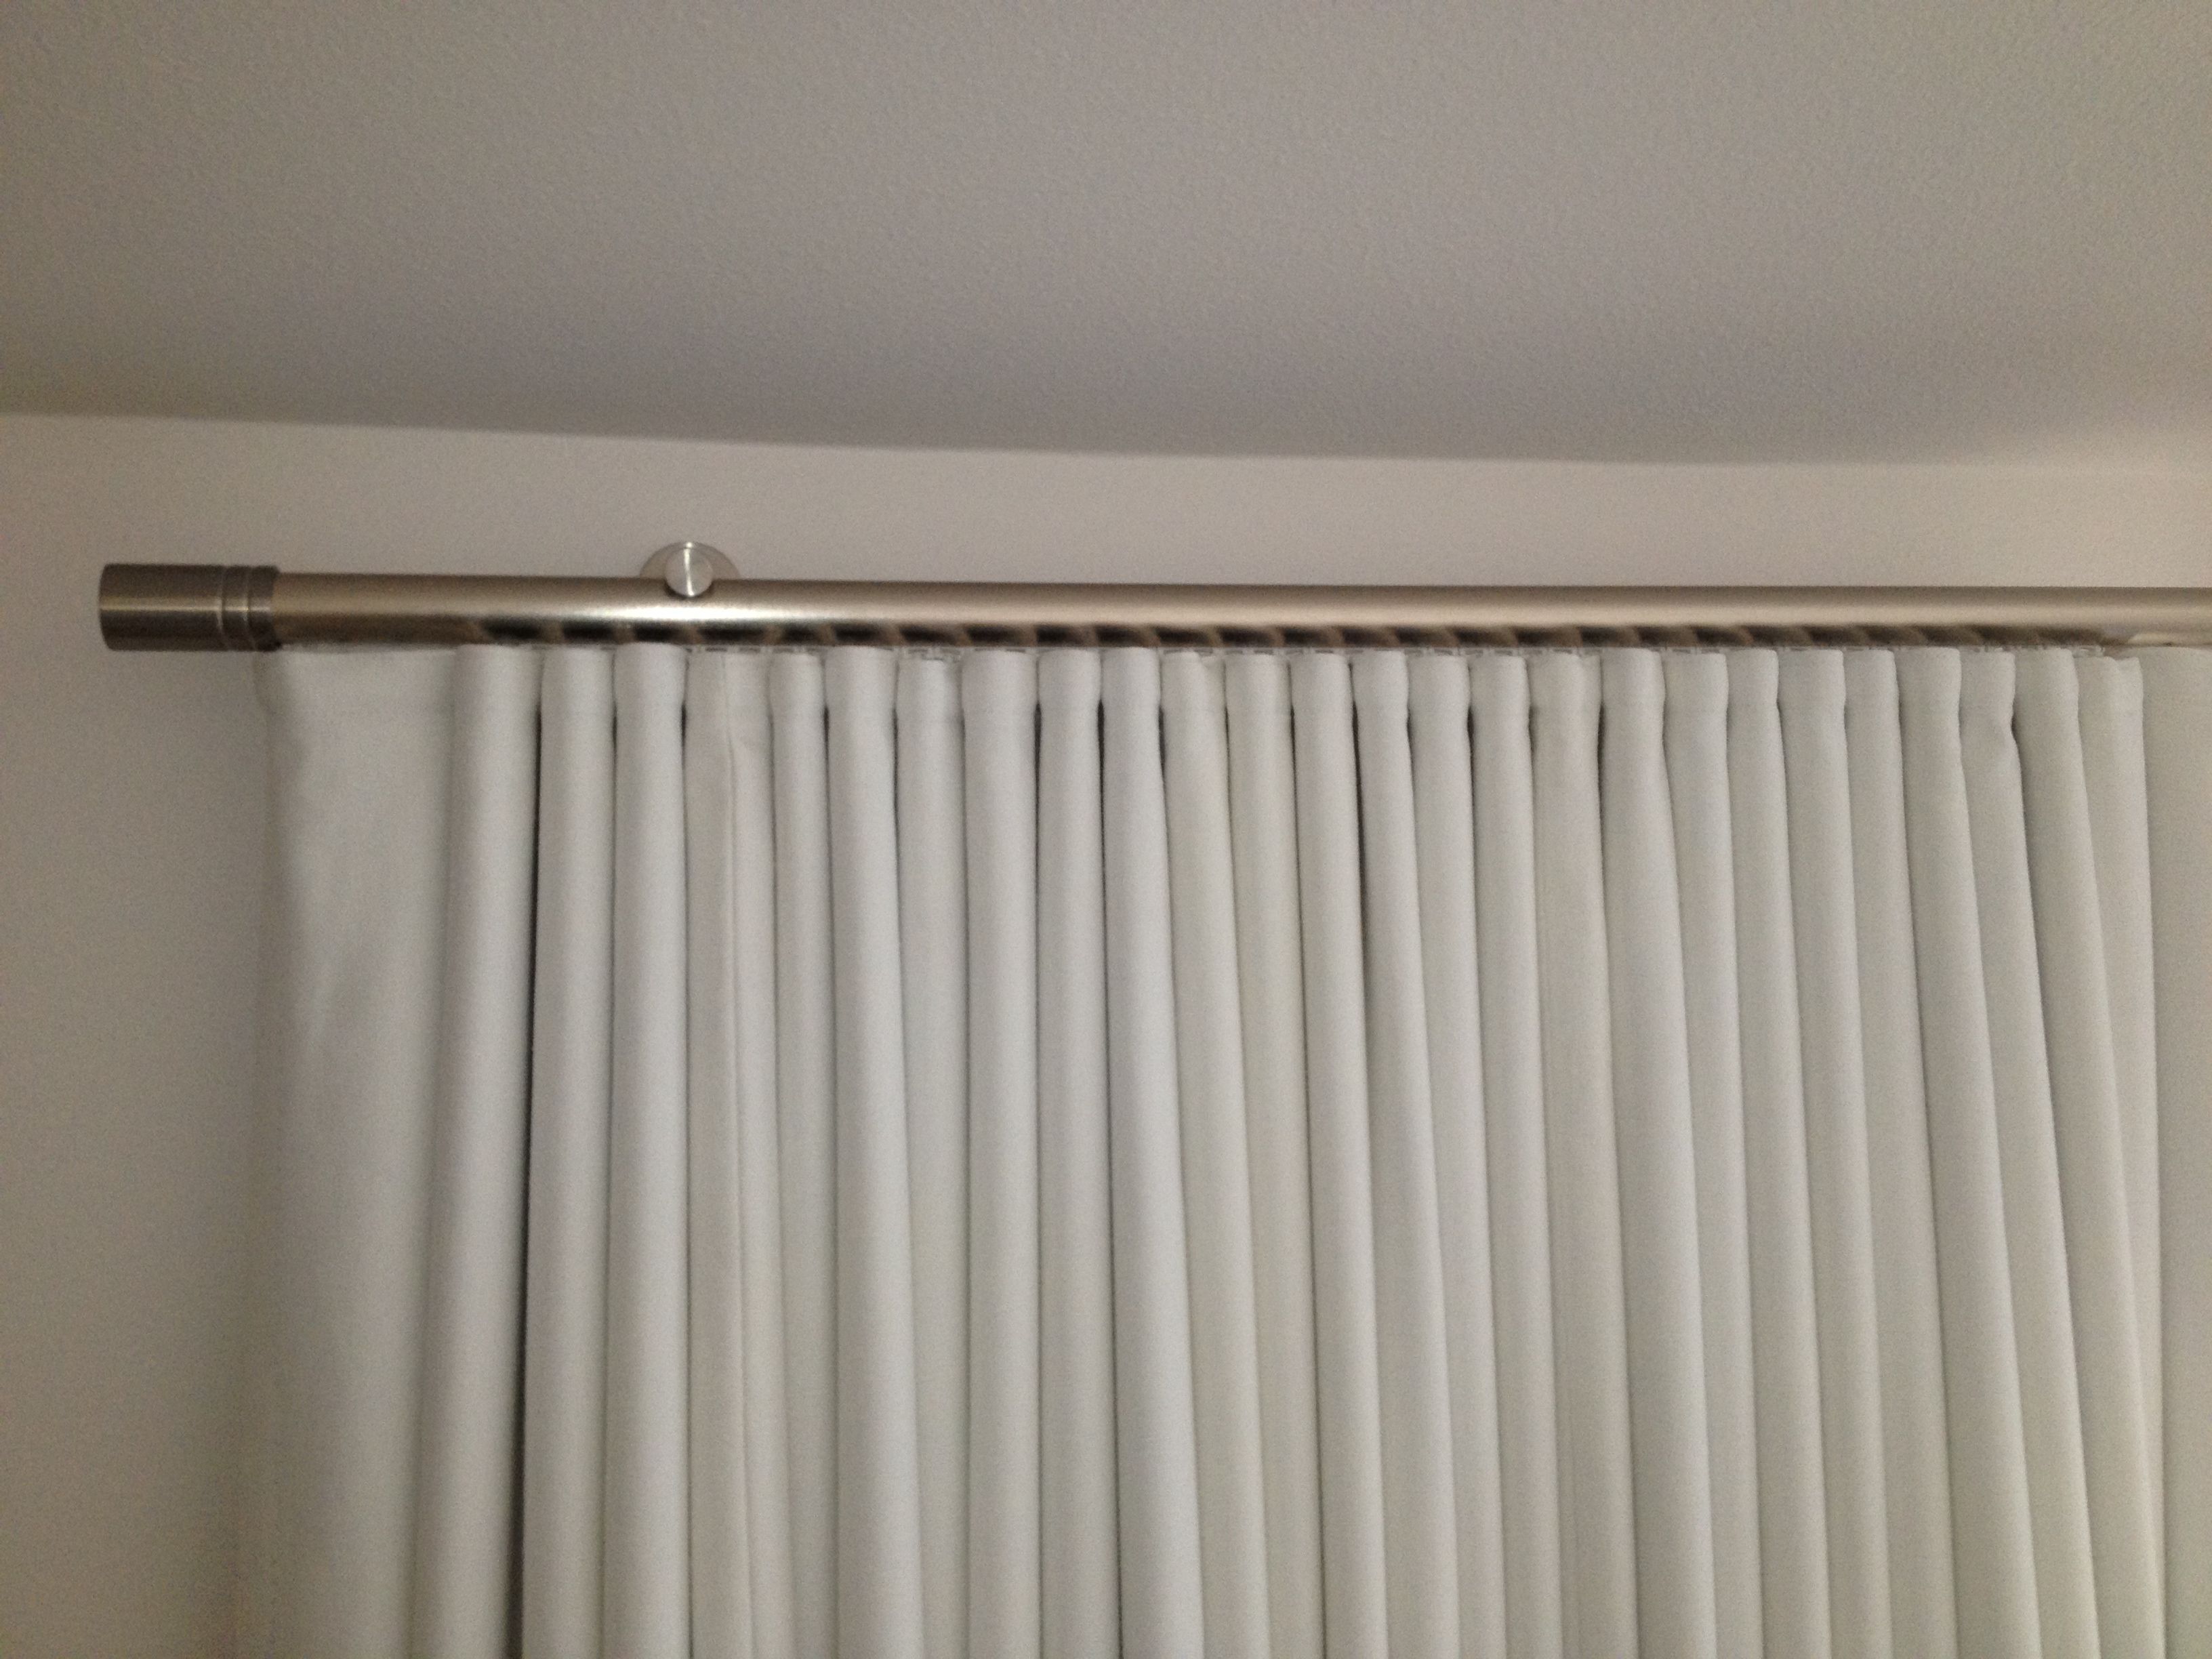 Wave and Ripple Fold Curtains, S Fold Curtains Supplies – The Drapery King Toronto